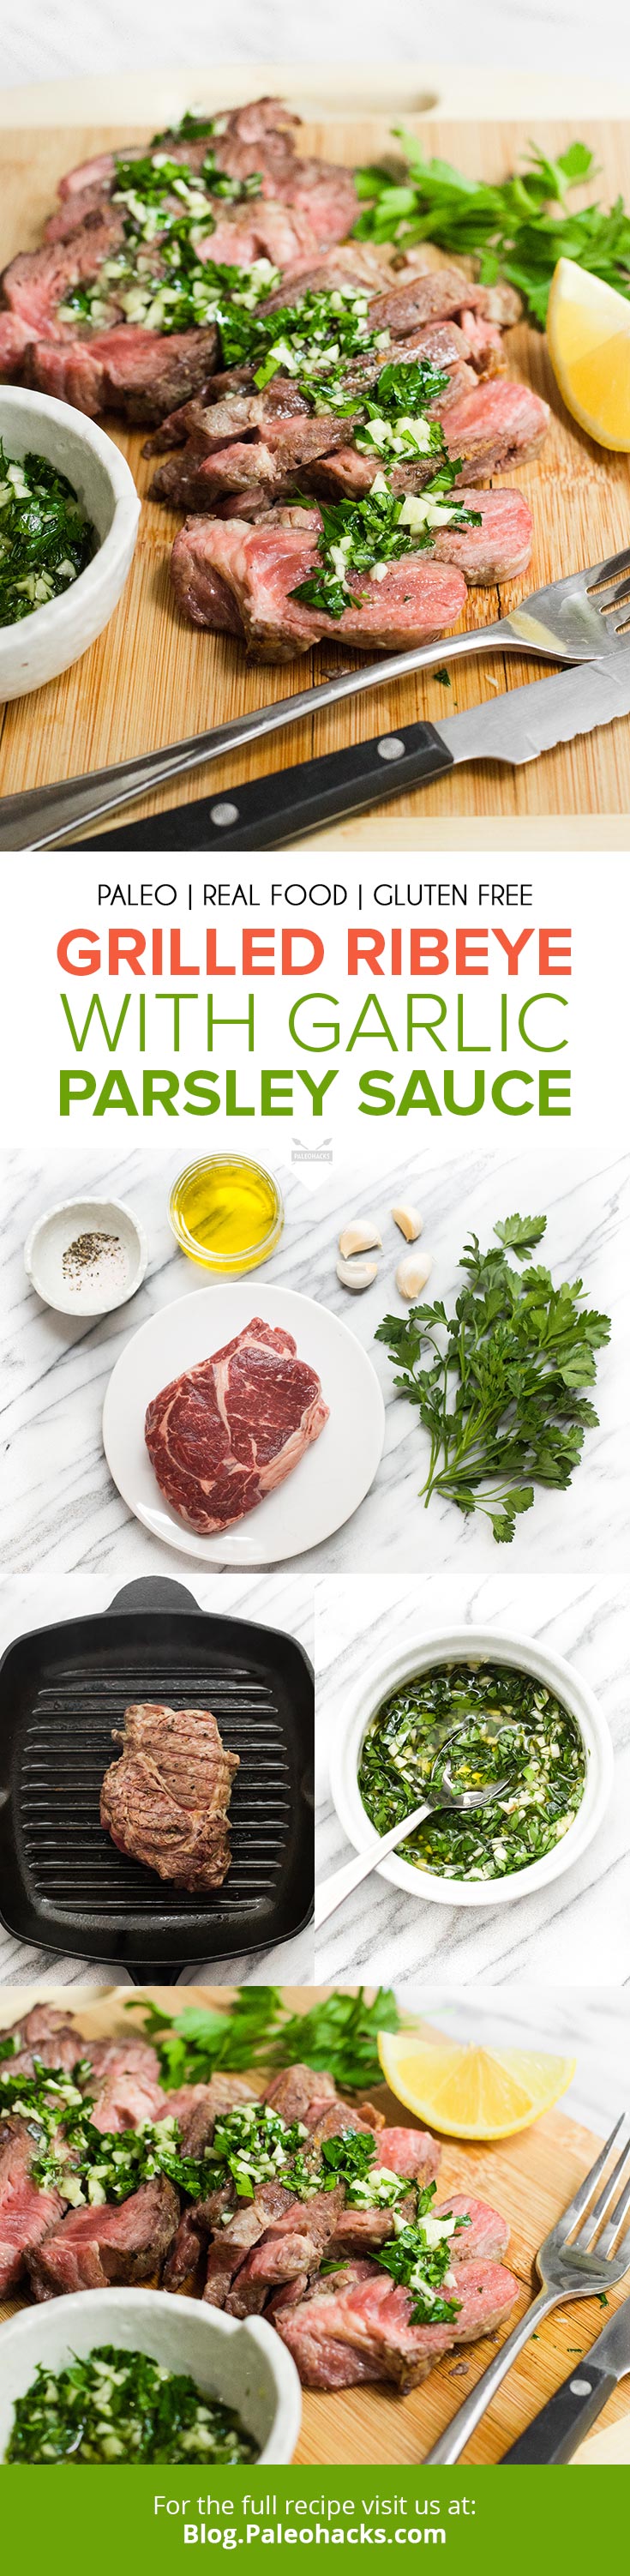 There’s nothing better than eating a juicy ribeye steak drizzled in a savory sauce made with garlic, parsley, and olive oil.